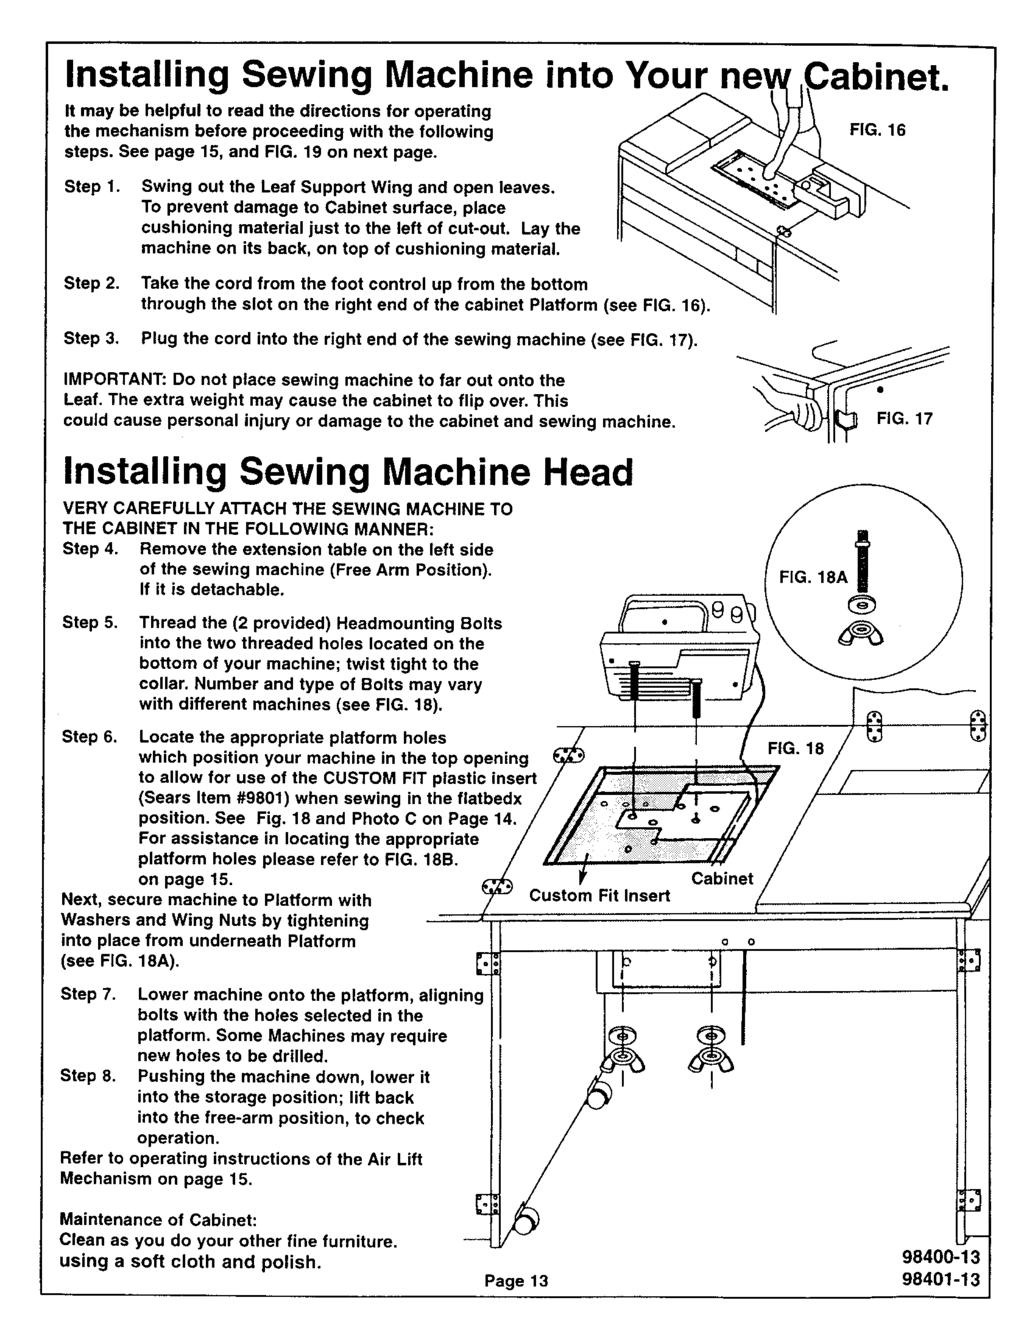 Installing Sewing Machine into Your It may be helpful to read the directions for operating the mechanism before proceeding with the following steps. See page 15, and FIG. 19 on next page. FIG. 16 let.